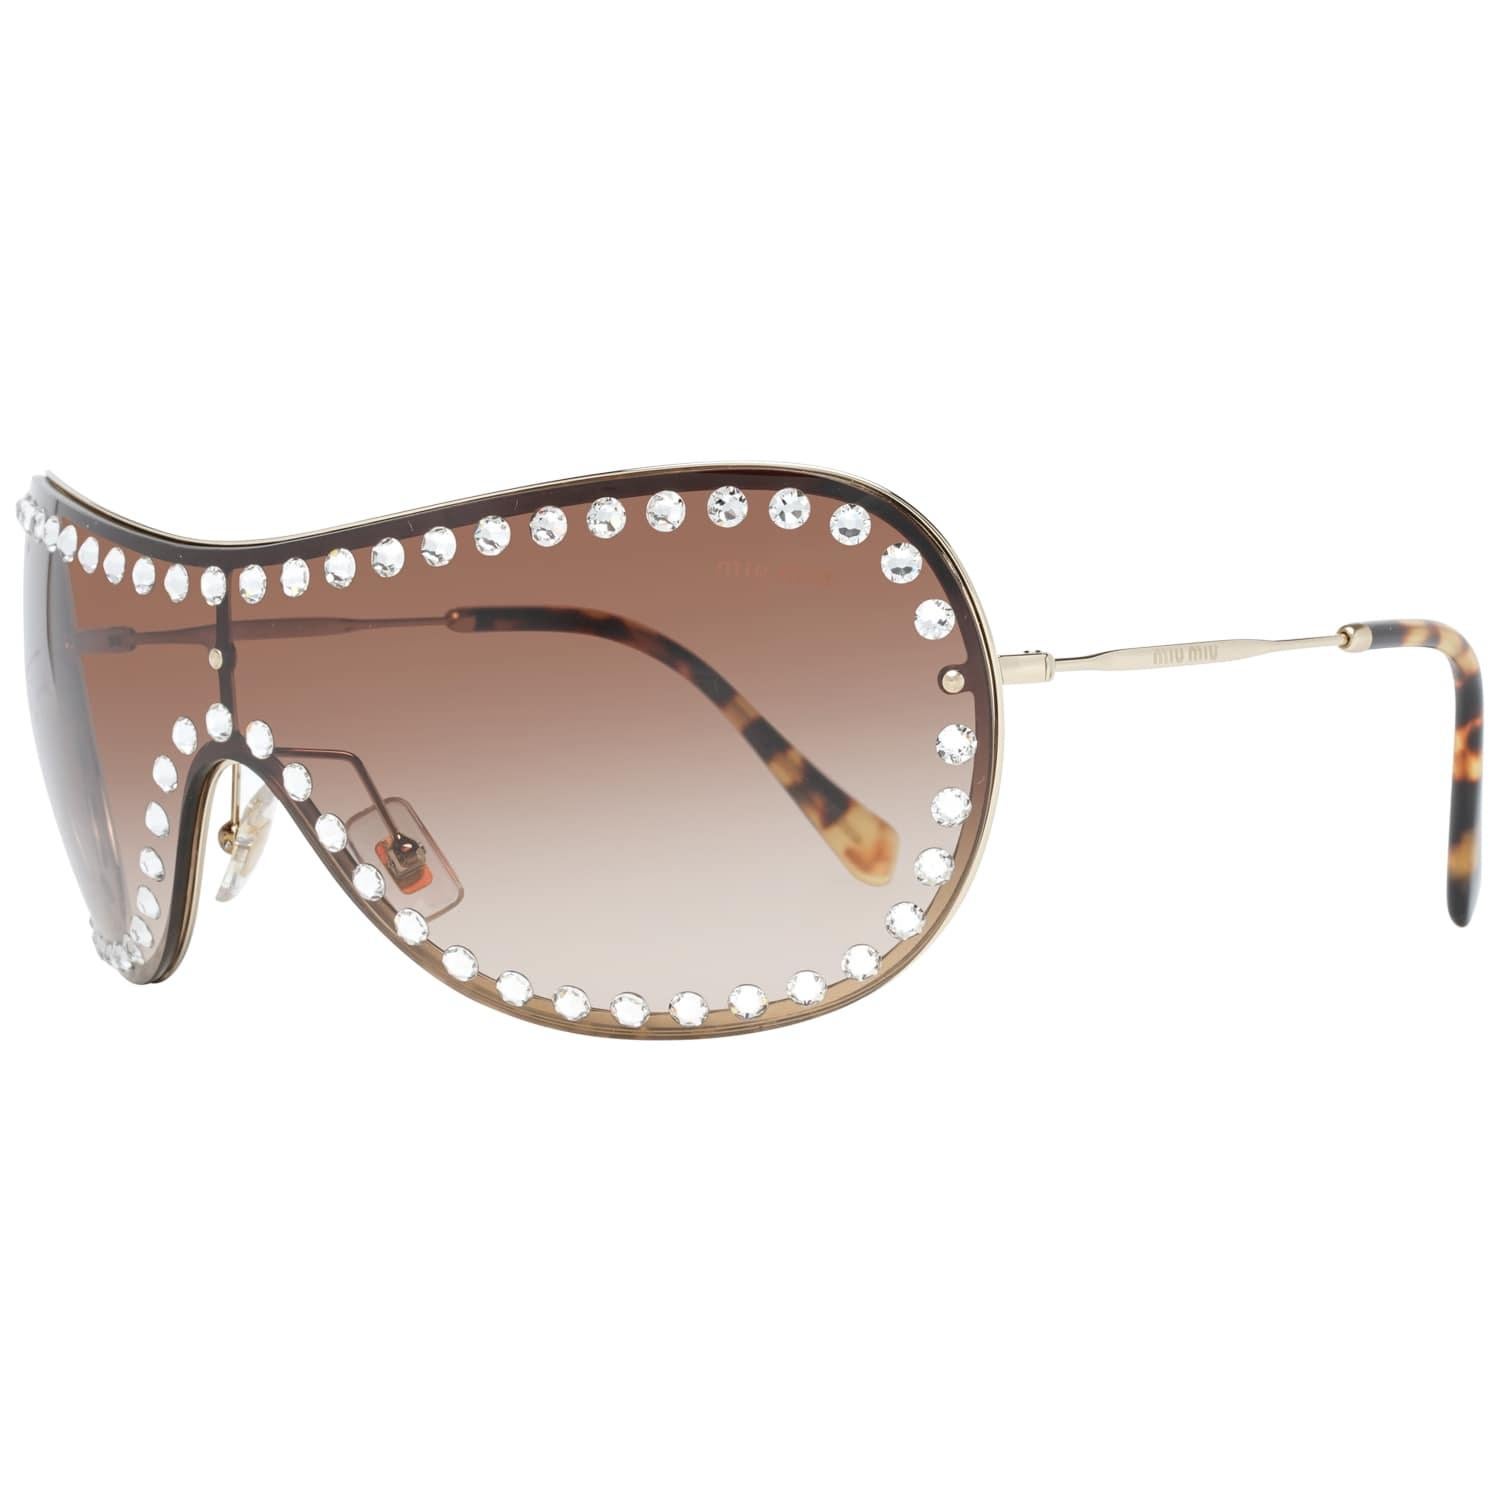 DetailsMATERIAL: MetalCOLOR: GoldMODEL: MU51VS 40ZVN6S1GENDER: WomenCOUNTRY OF MANUFACTURE: ItalyTYPE: SunglassesORIGINAL CASE?: YesSTYLE: Mono LensOCCASION: CasualFEATURES: LightweightLENS COLOR: BrownLENS TECHNOLOGY: GradientYEAR MANUFACTURED: